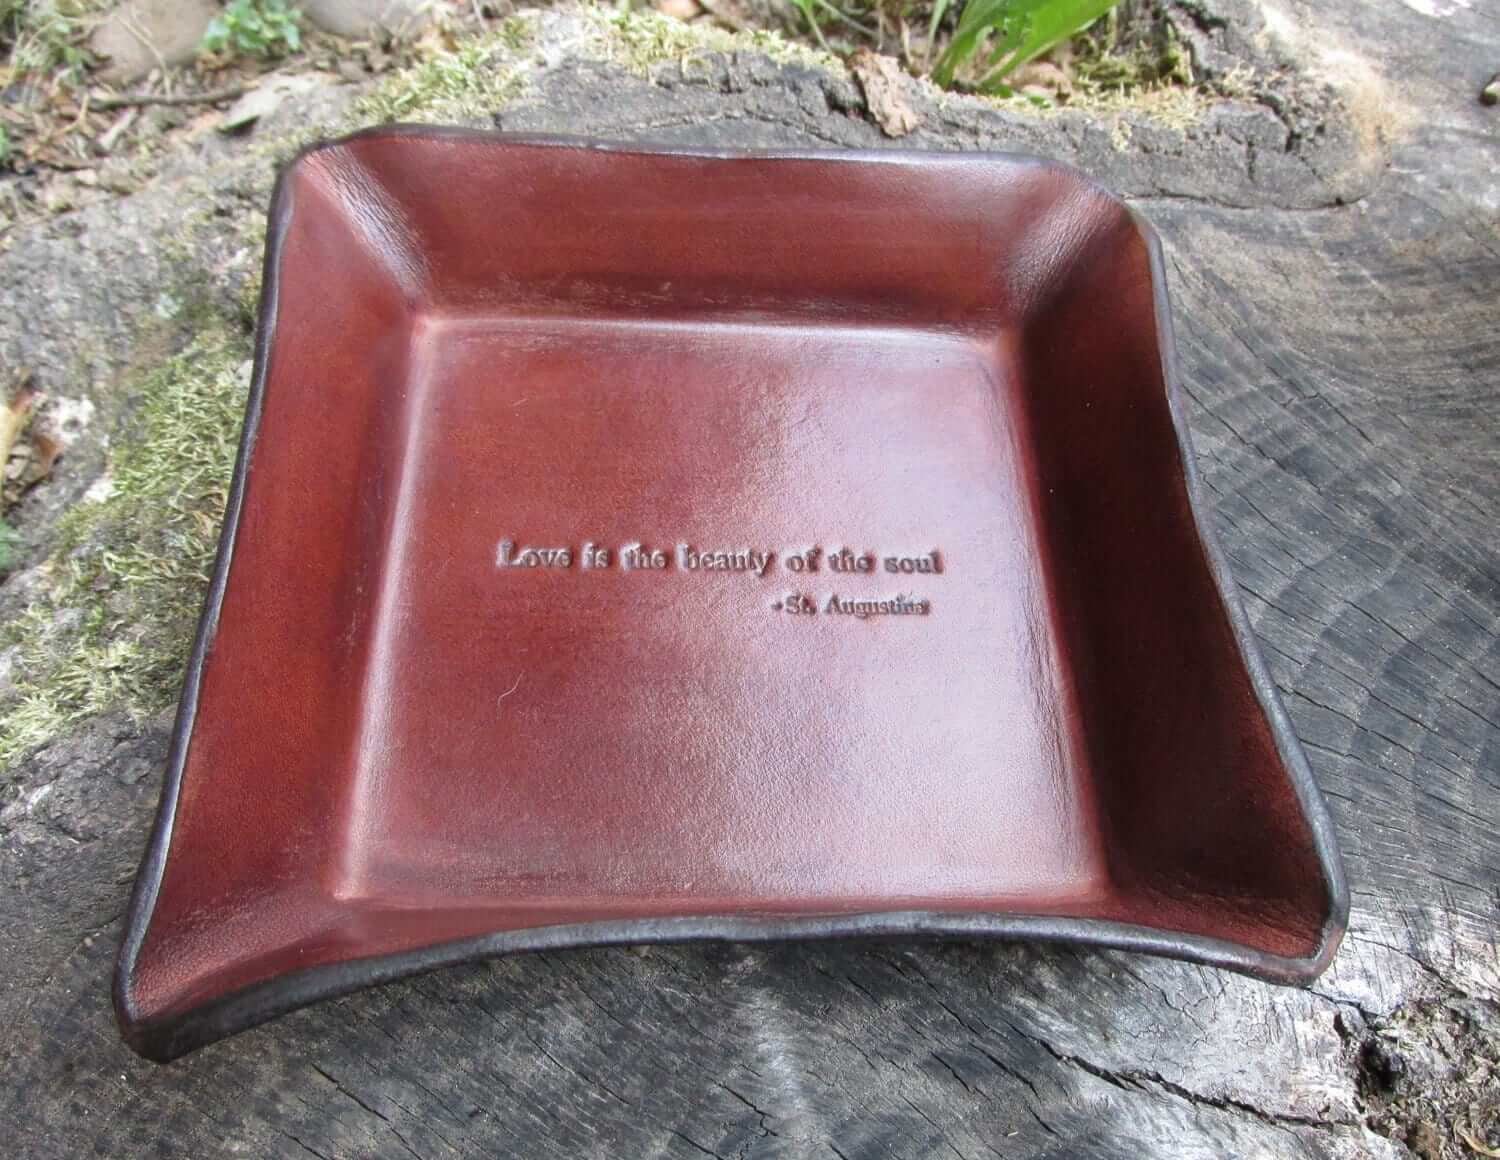 3rd Anniversary gift leather tray, "Love is the beauty of the soul". Brown Leather.